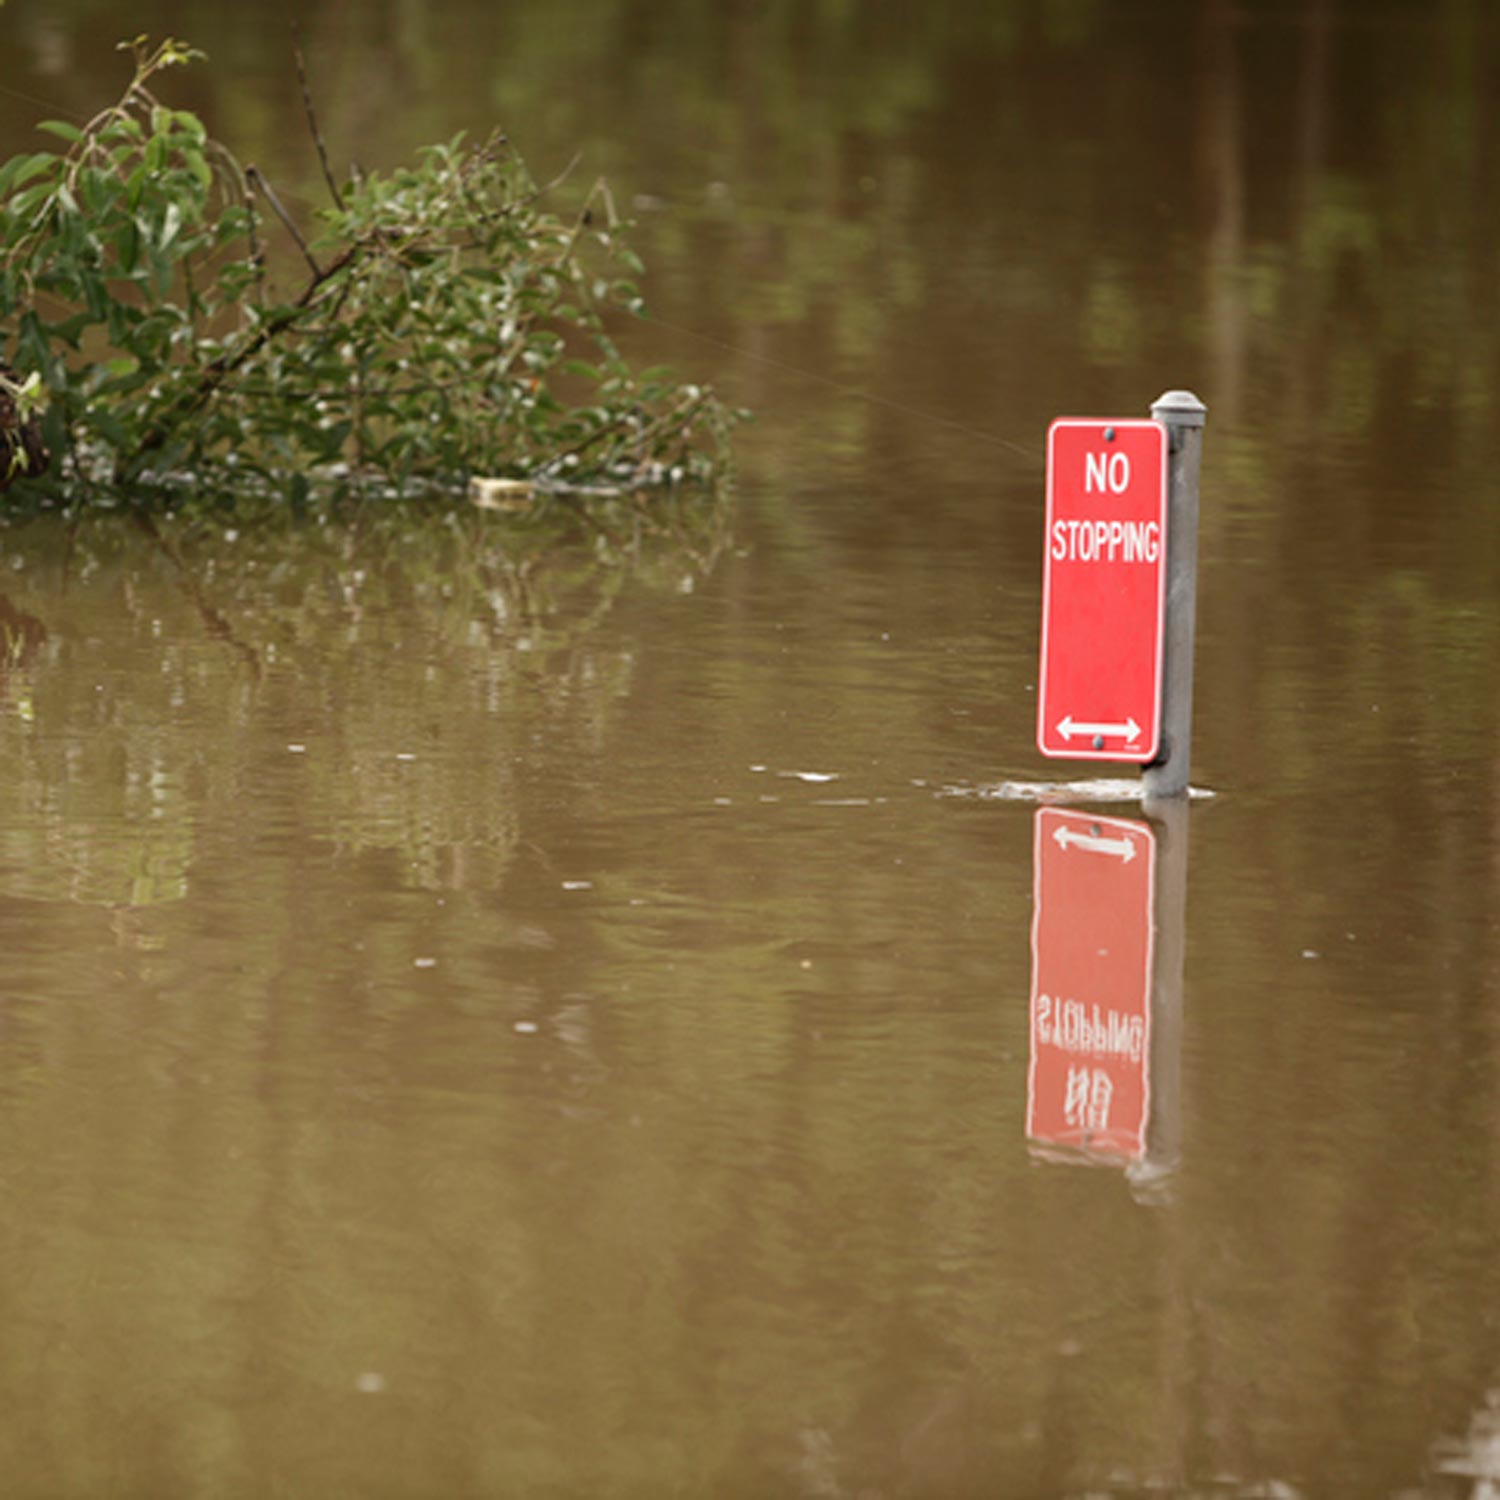 Flood waters in Lismore reach top of no stopping road sign^empty:{ds__assetid^as_asset:asset_name}